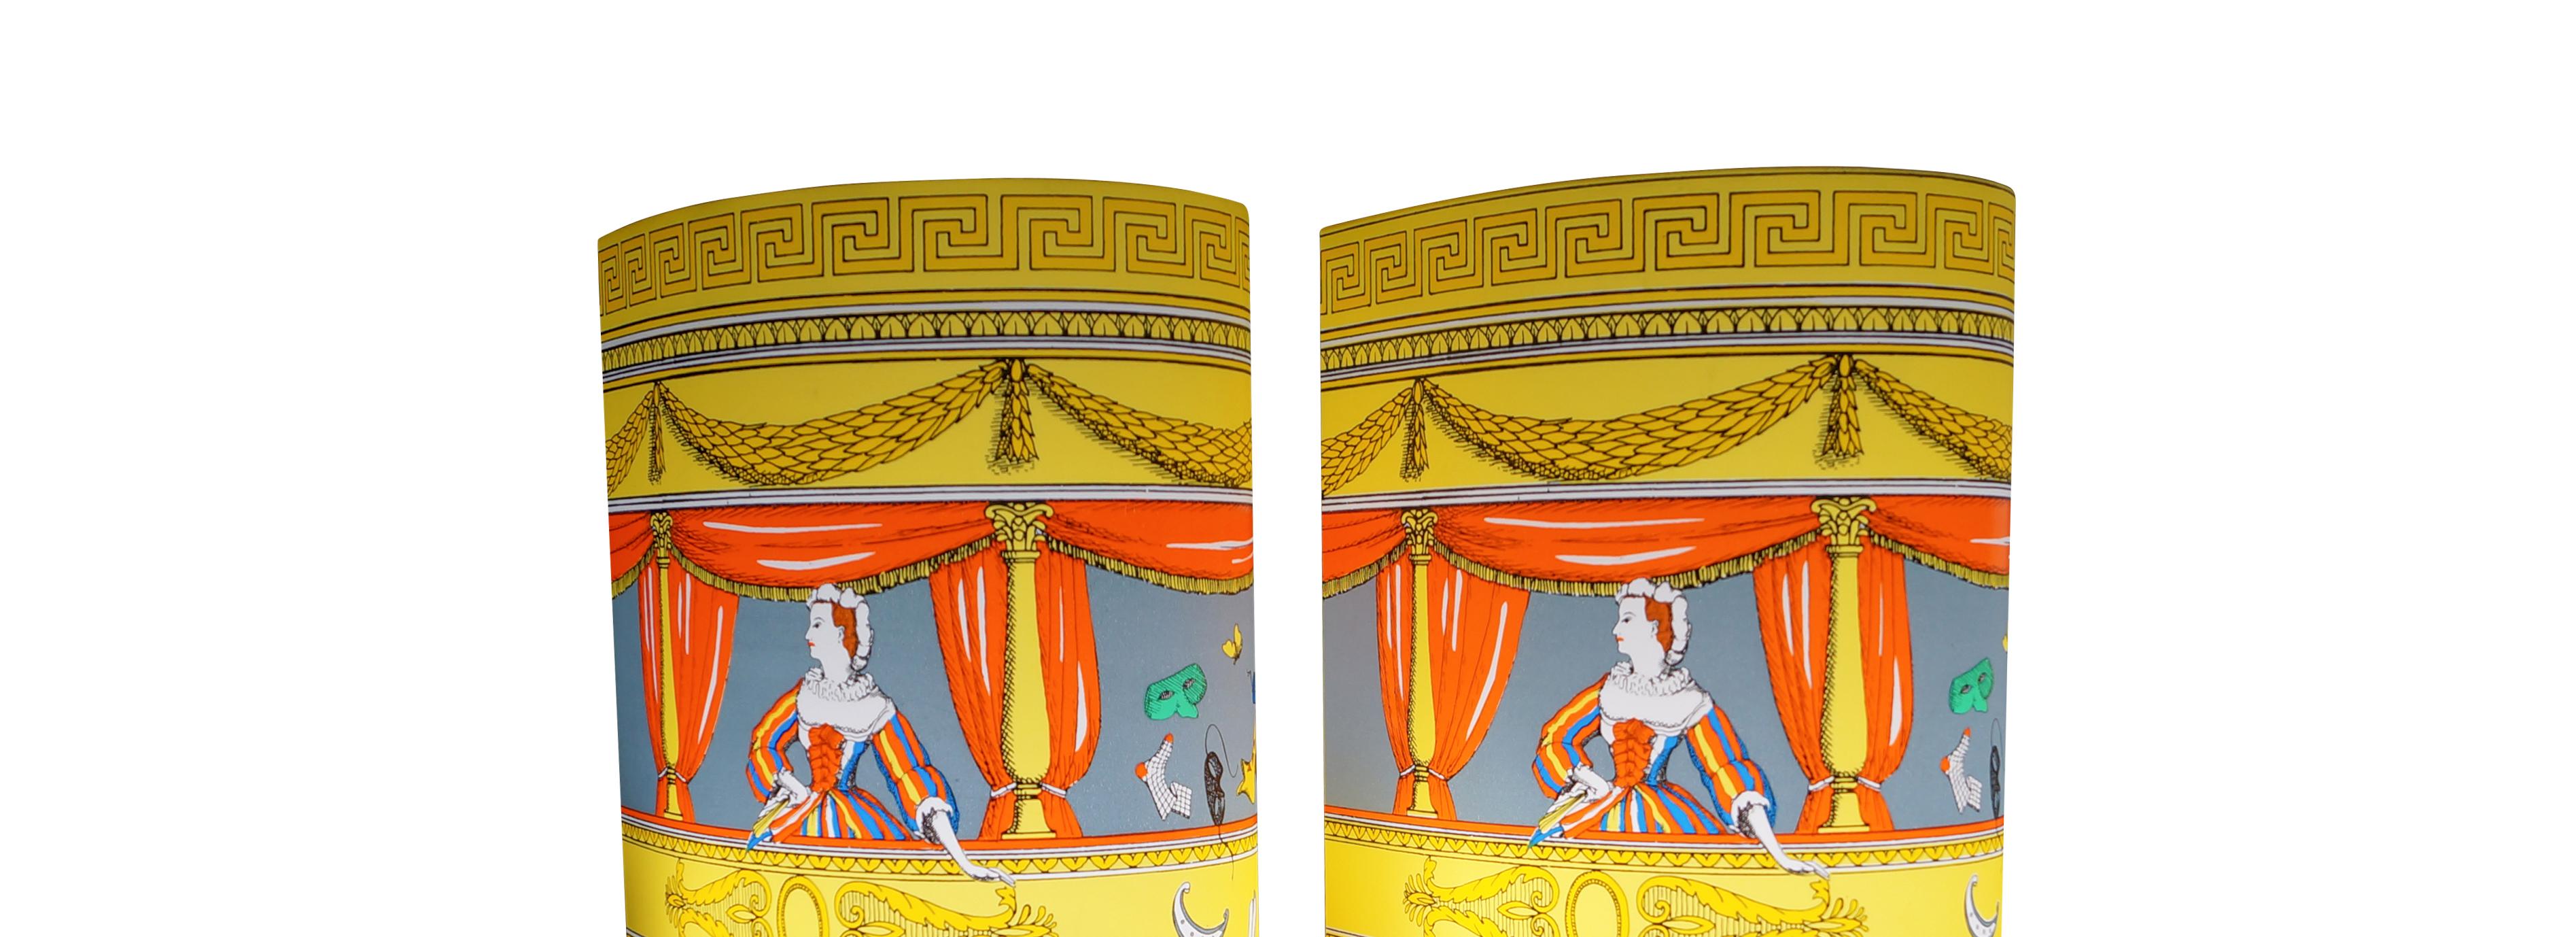 Perspex Table Lamps Pair by Barnaba Fornasetti Commedia Italiana Media, 1995 For Sale 1